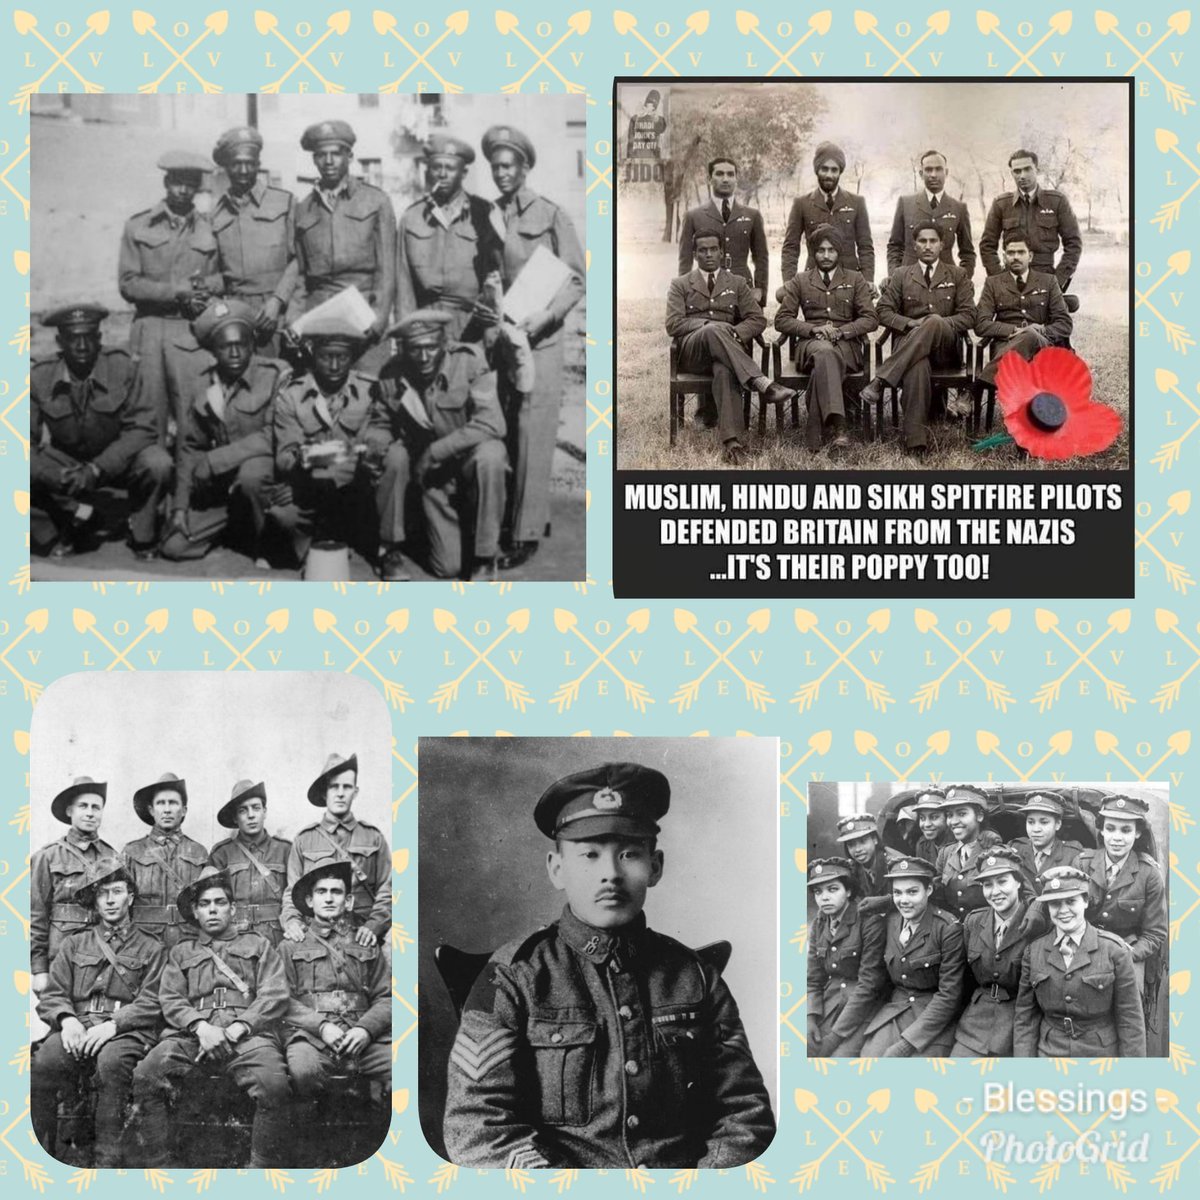 PART 3 - This was a small way that we could show our sincere support, gratitude and admiration for Canada's veterans of yesterday, today and tomorrow! #lestweforget #100yearsendofWW1  #castleproud #canadaremembers #pdsbdance #pdsbdrama @peelschools @castlebrooketlc @qhoppie